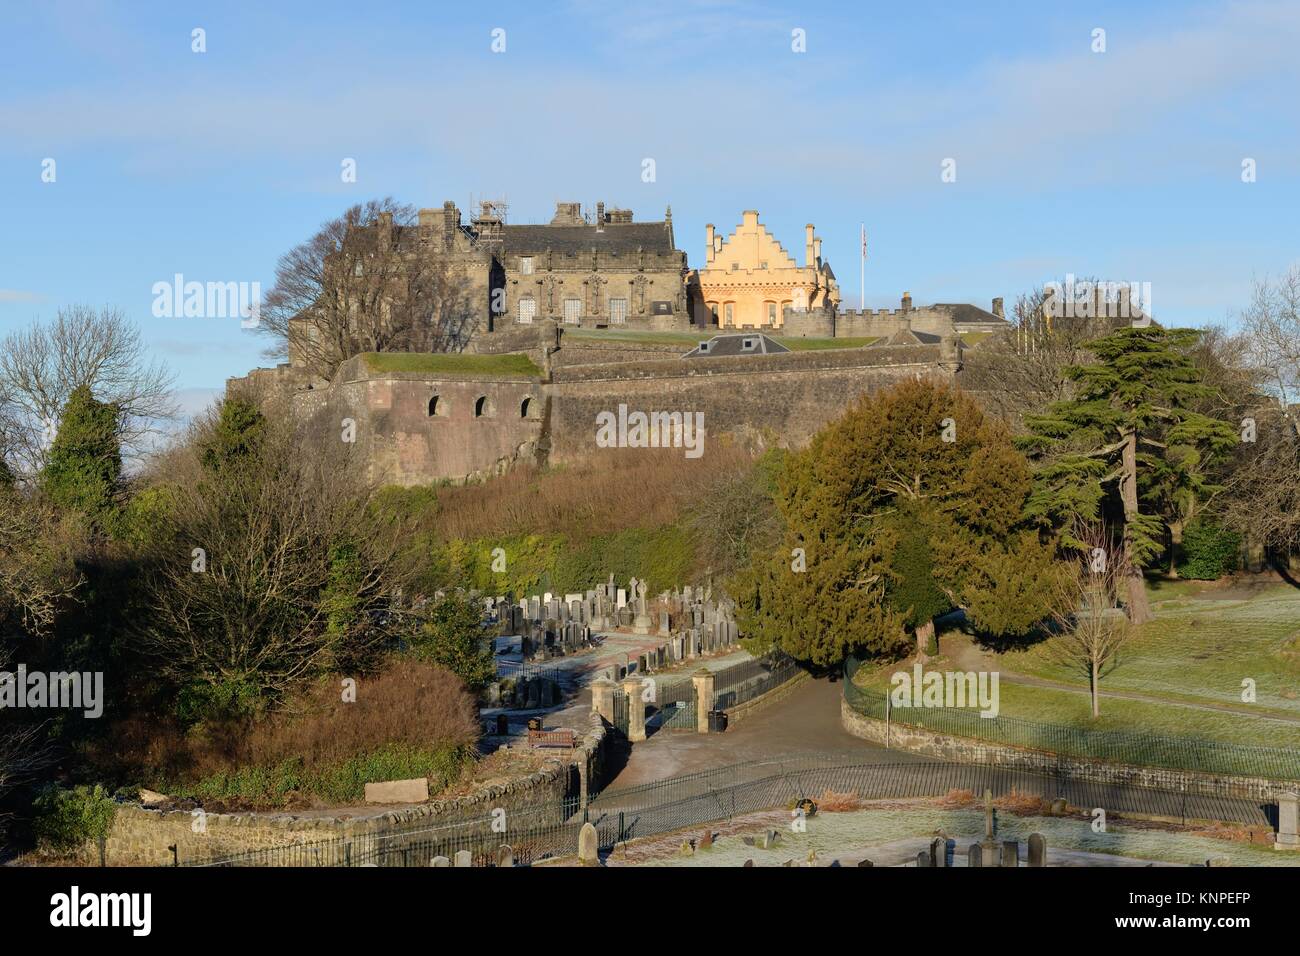 Overlooking the ancient cemetery lies Stirling Castle the childhood home of Mary Queen of Scots. Stirling, Scotland, UK, Europe. Stock Photo